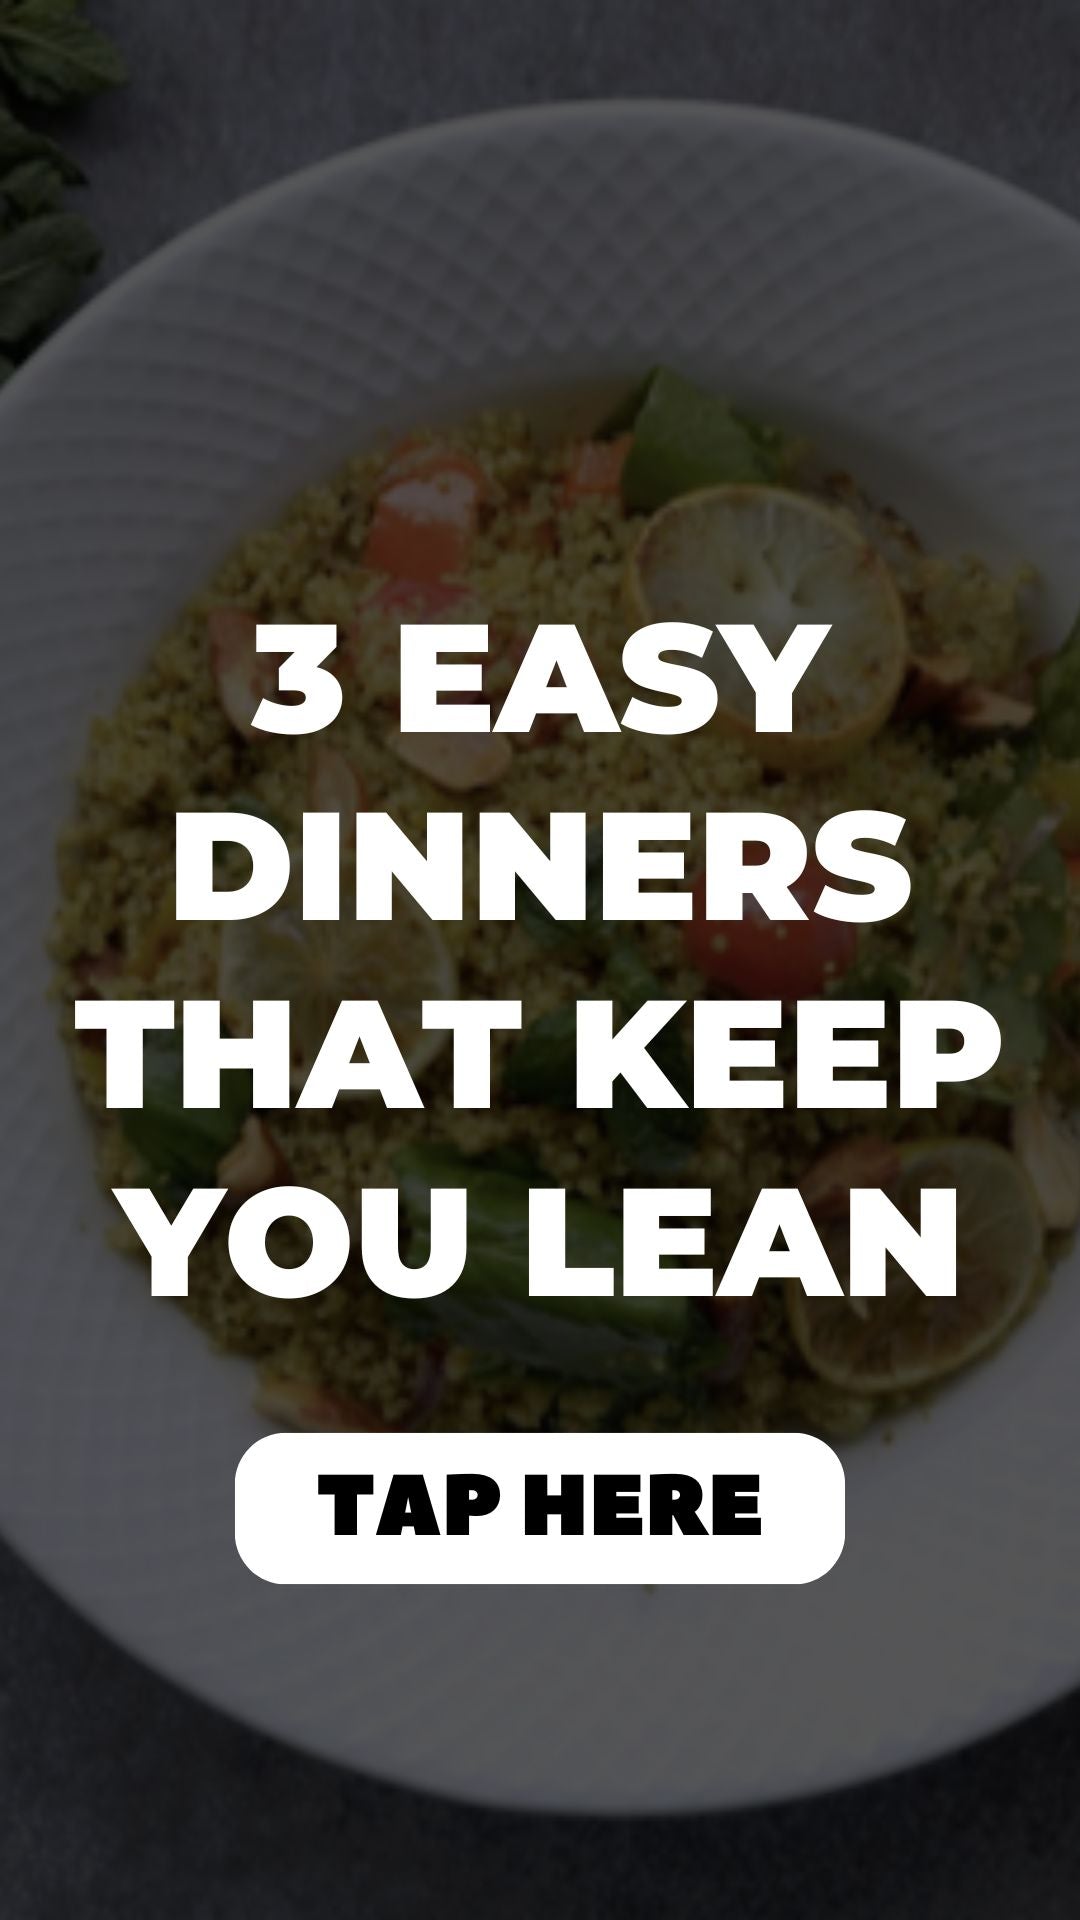 3 Easy Dinners That Keep You Lean